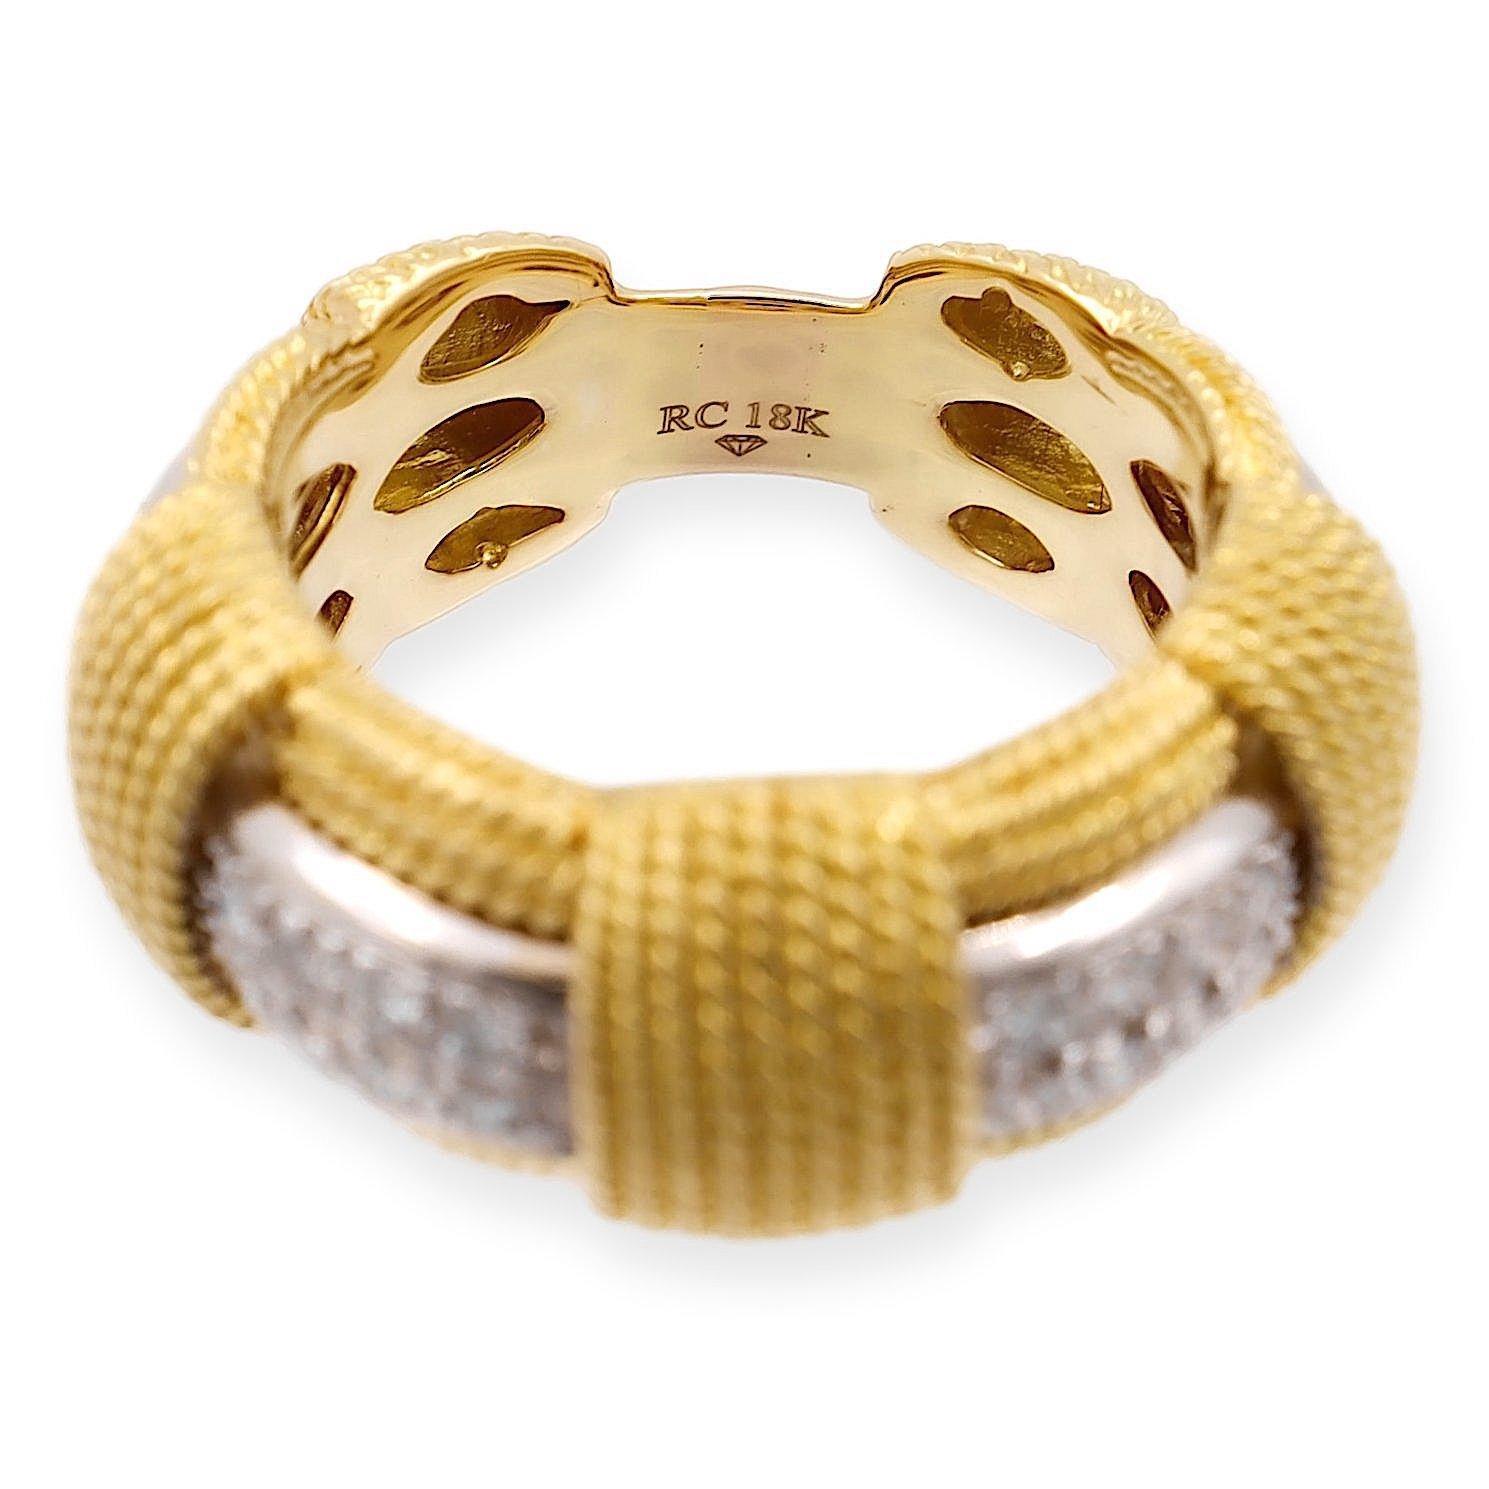 Roberto Coin band ring an epitome of Italian craftsmanship in this , a masterpiece from the 